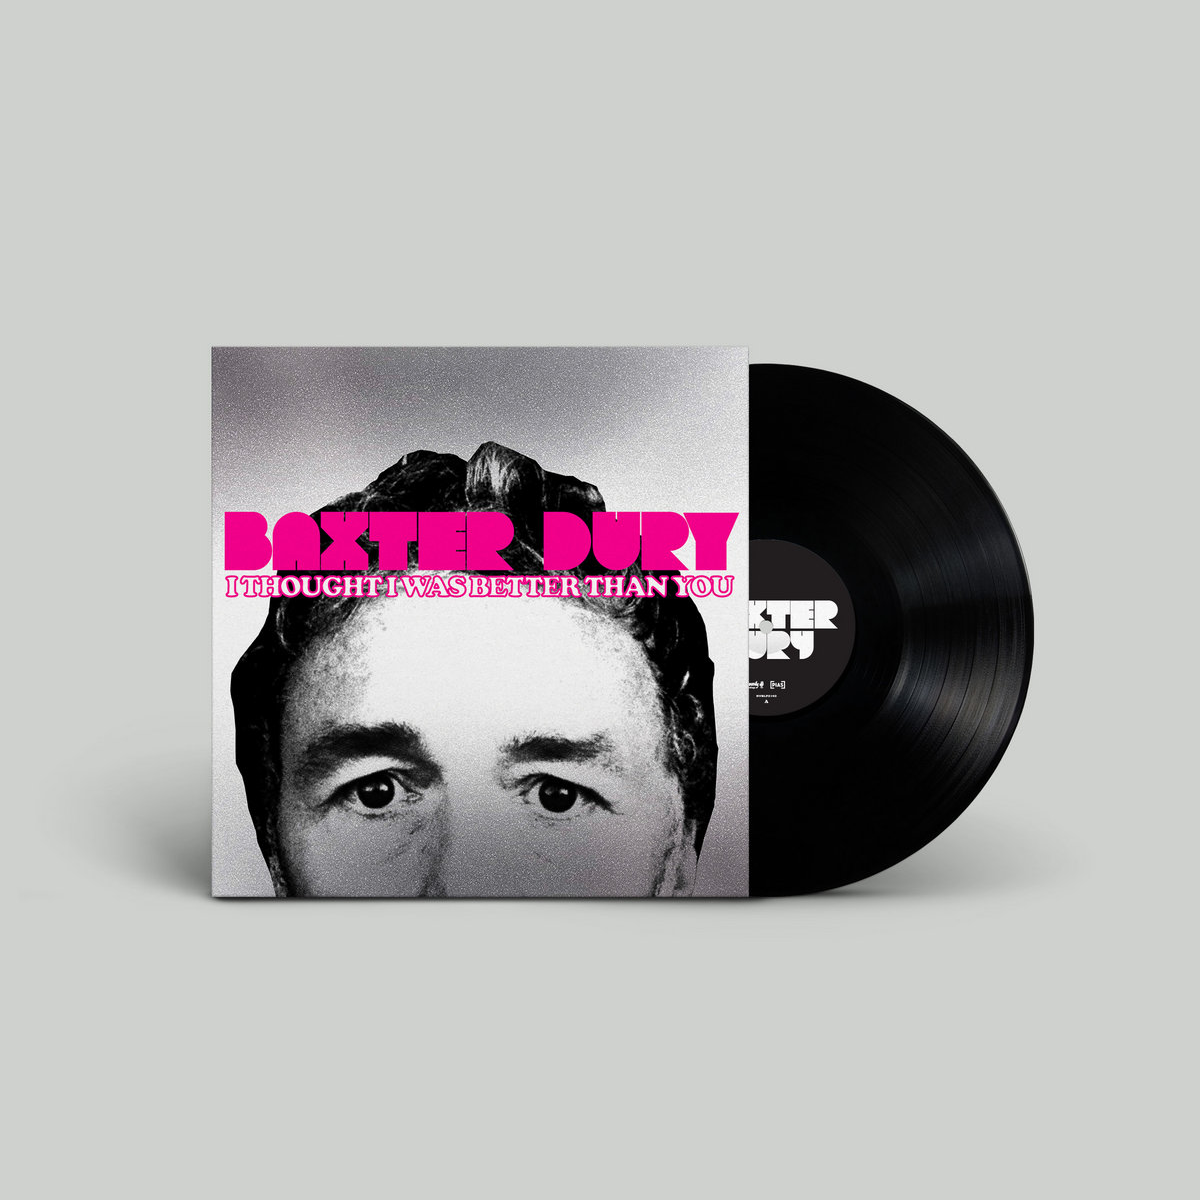 Baxter Dury - Baxter Dury - I Thought I Was Better Than You: Limited Opaque  Pink Vinyl LP - Sound of Vinyl